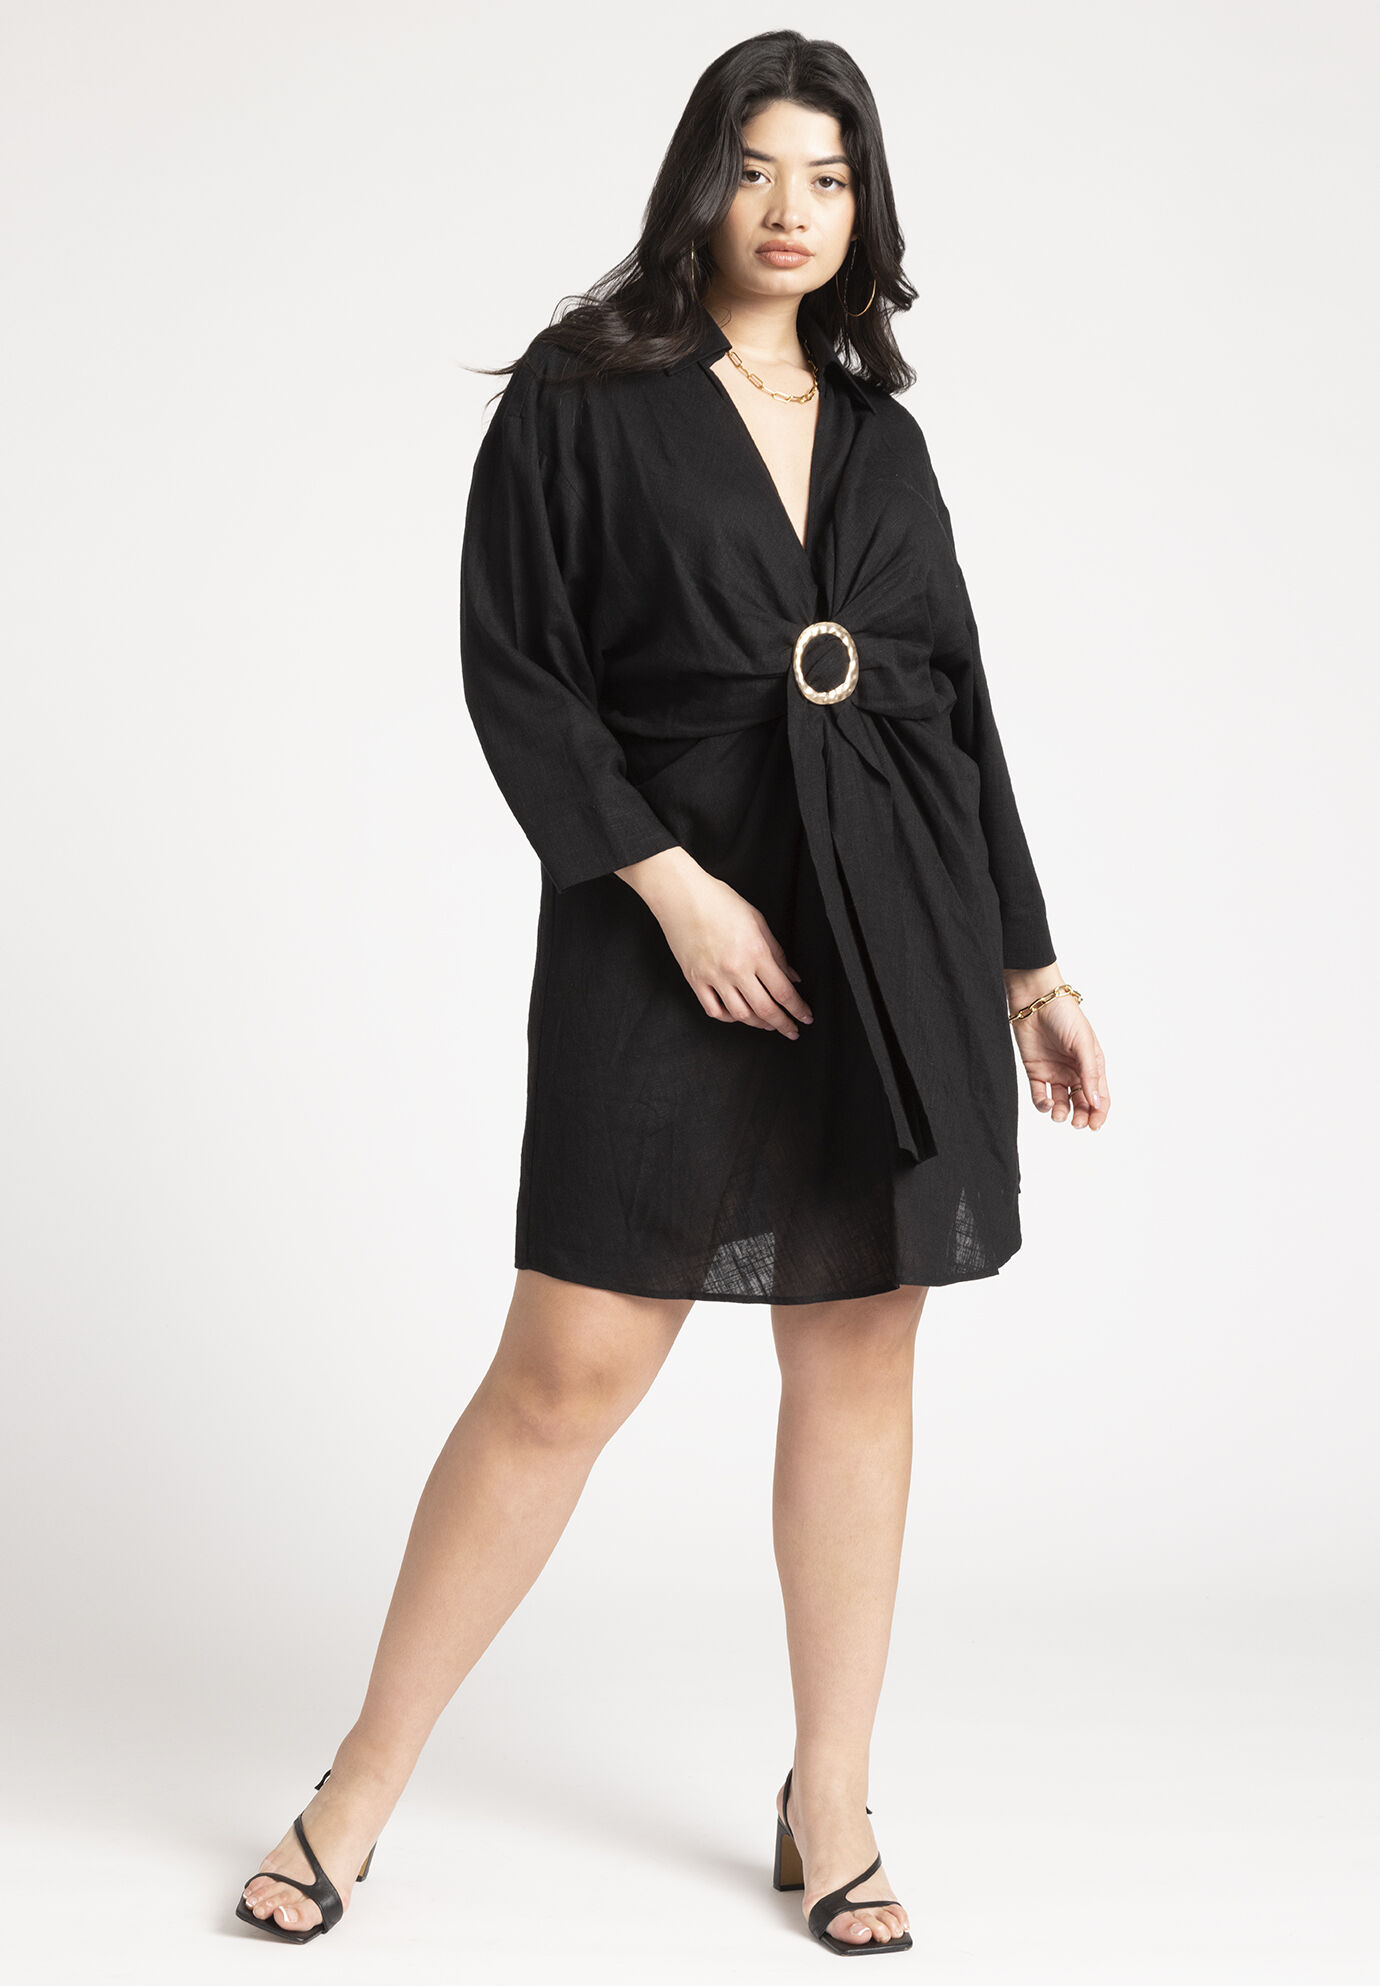 Plus Size Dolman Long Sleeves Short Collared Cover Up/Tunic